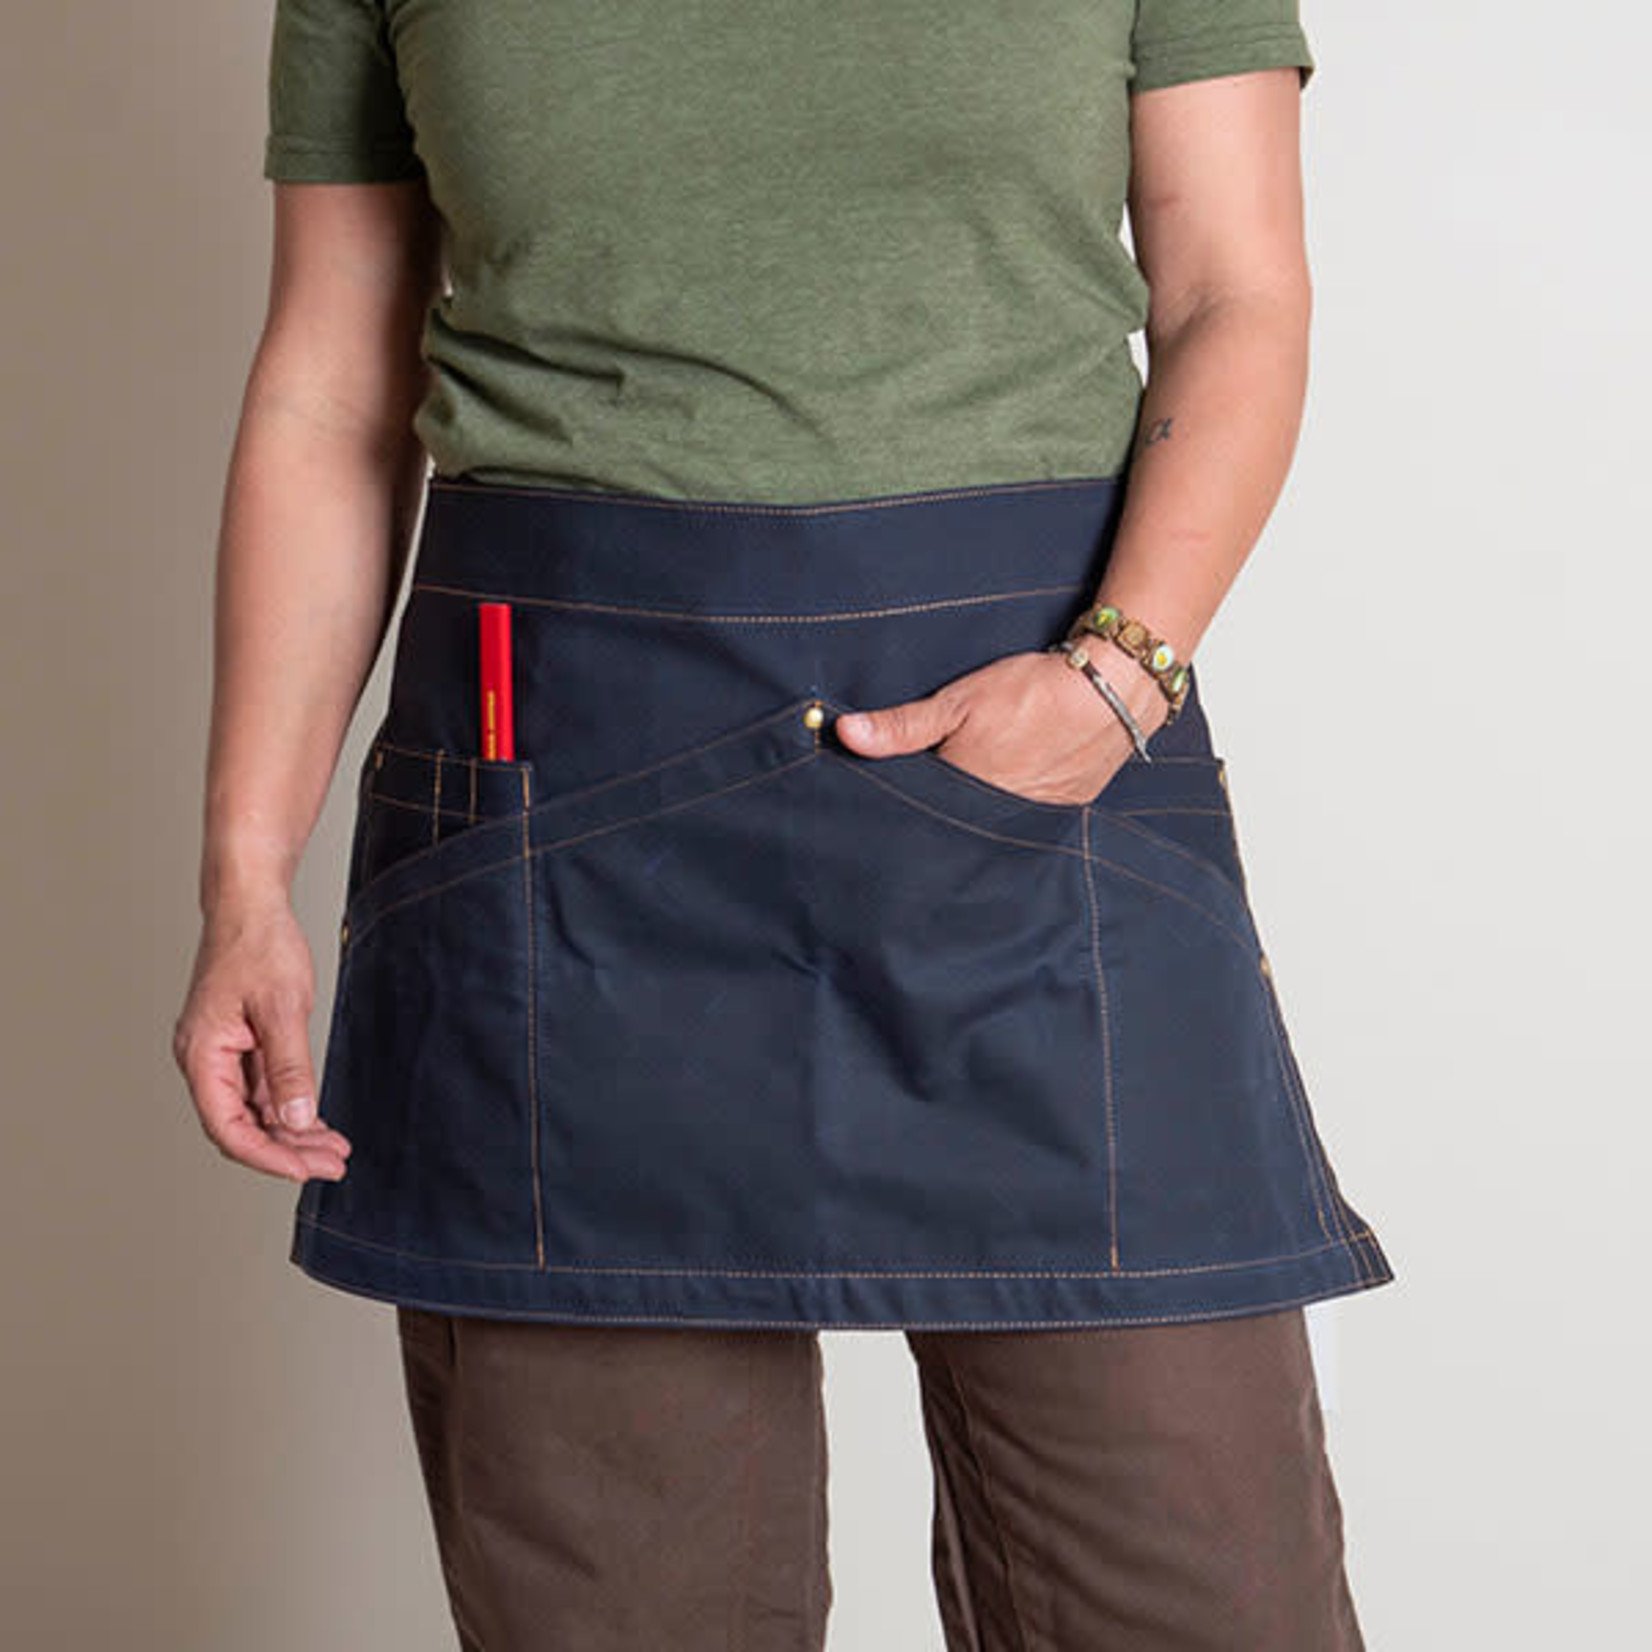 Red Ants Pants Work Apron